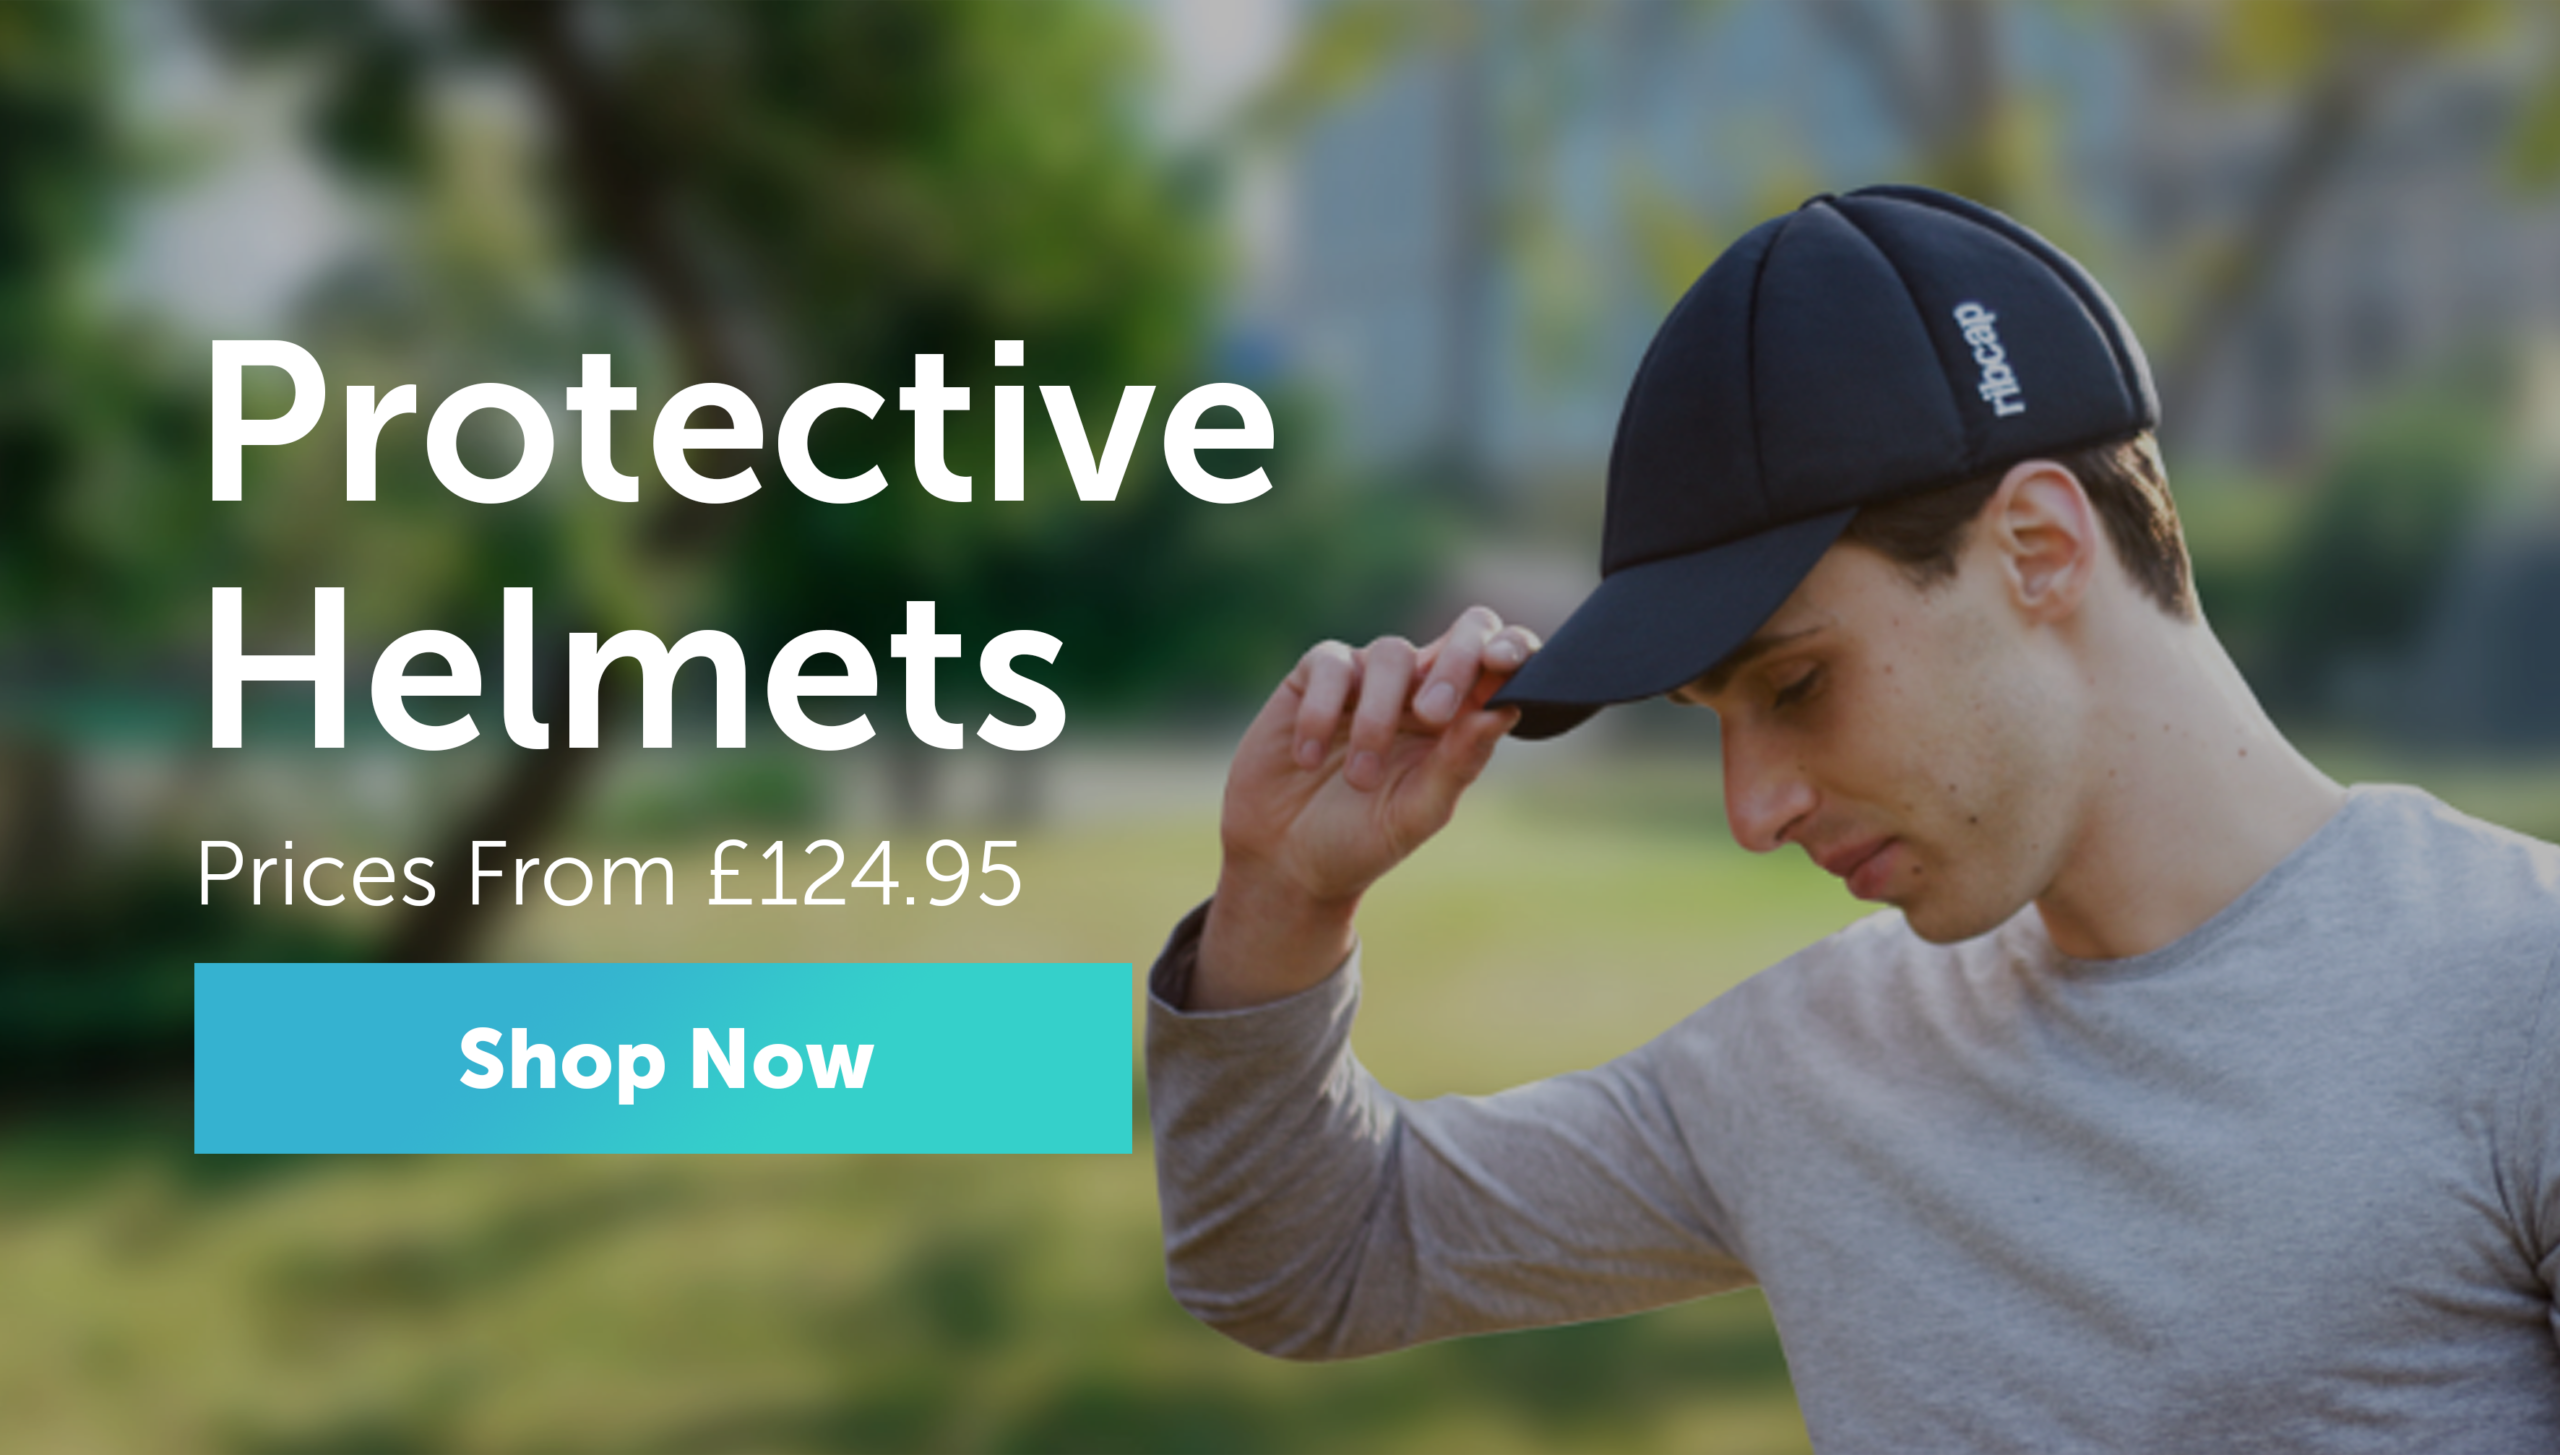 Protective Helmets From £124.95